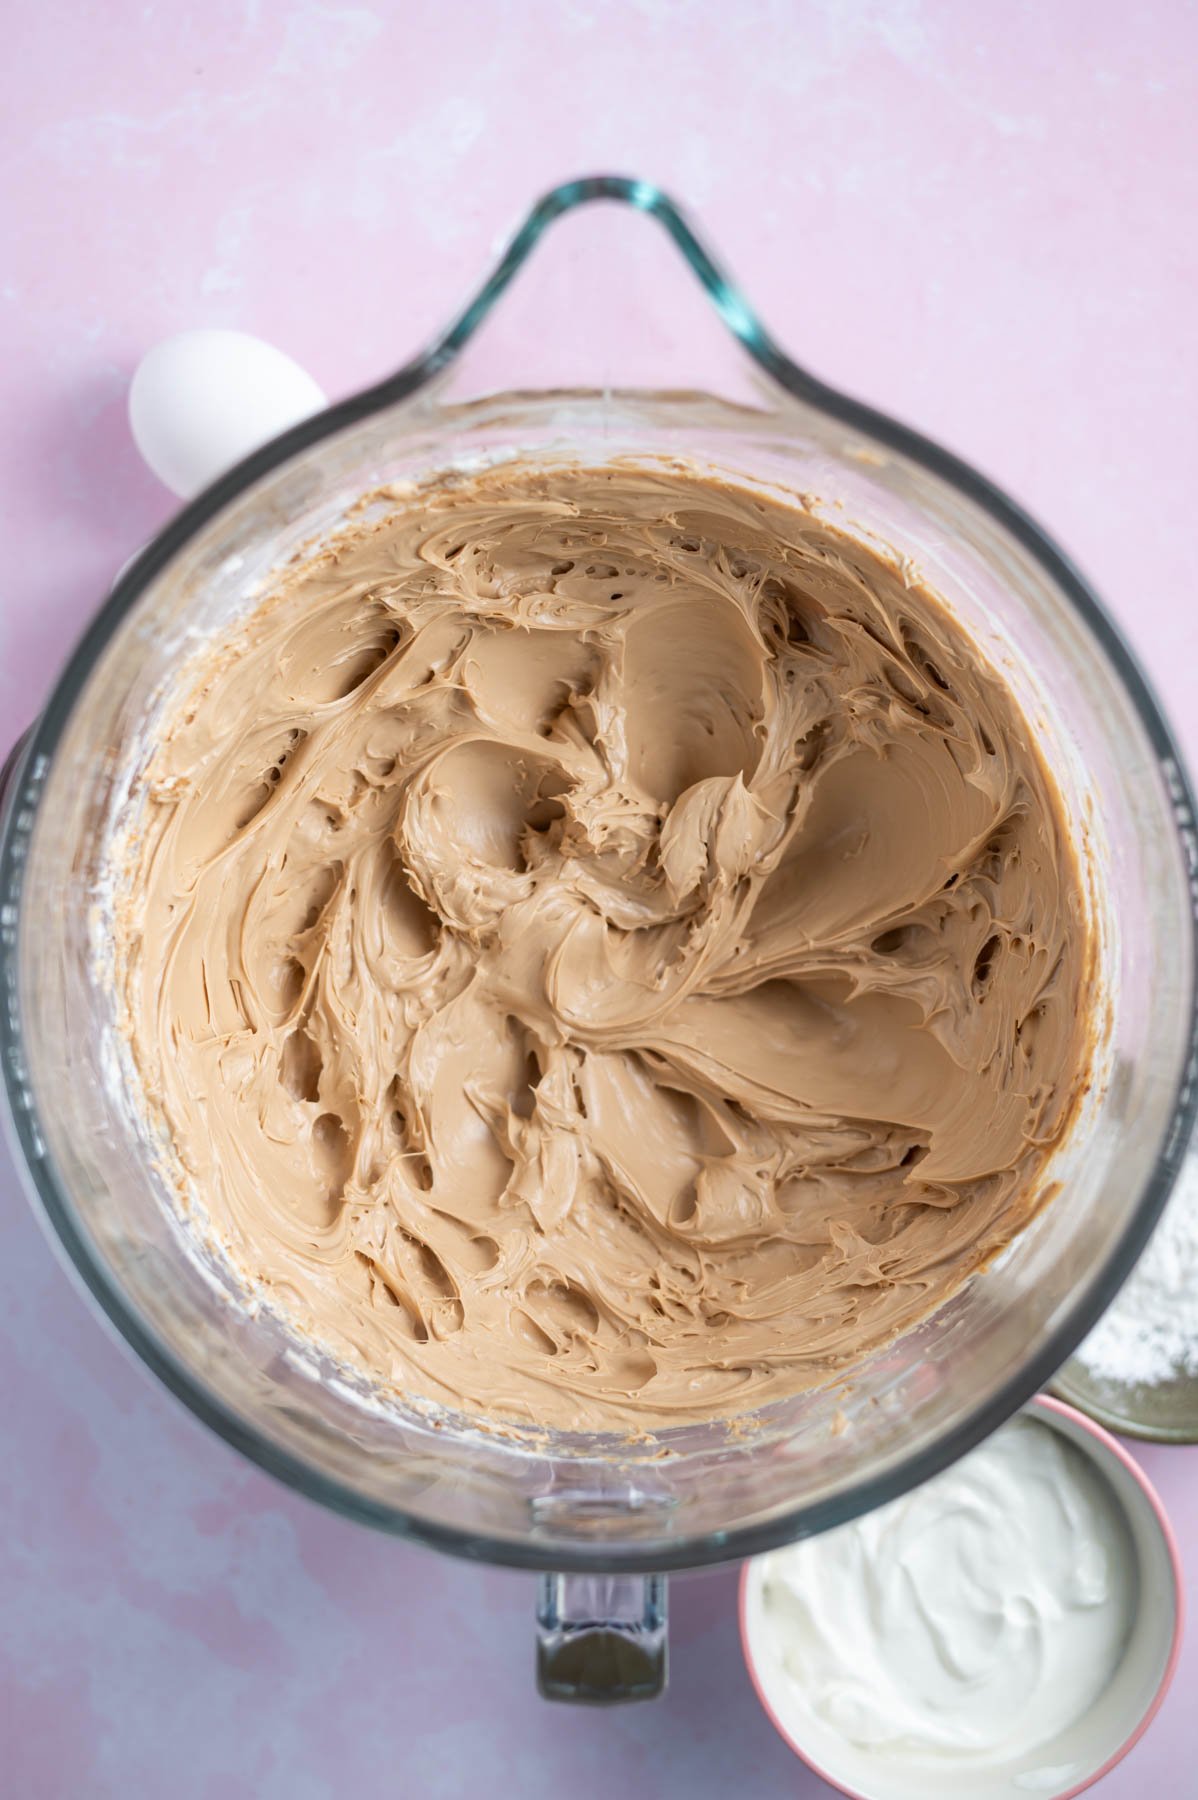 cream cheese, espresso powder and sugar beaten together in a mixing bowl